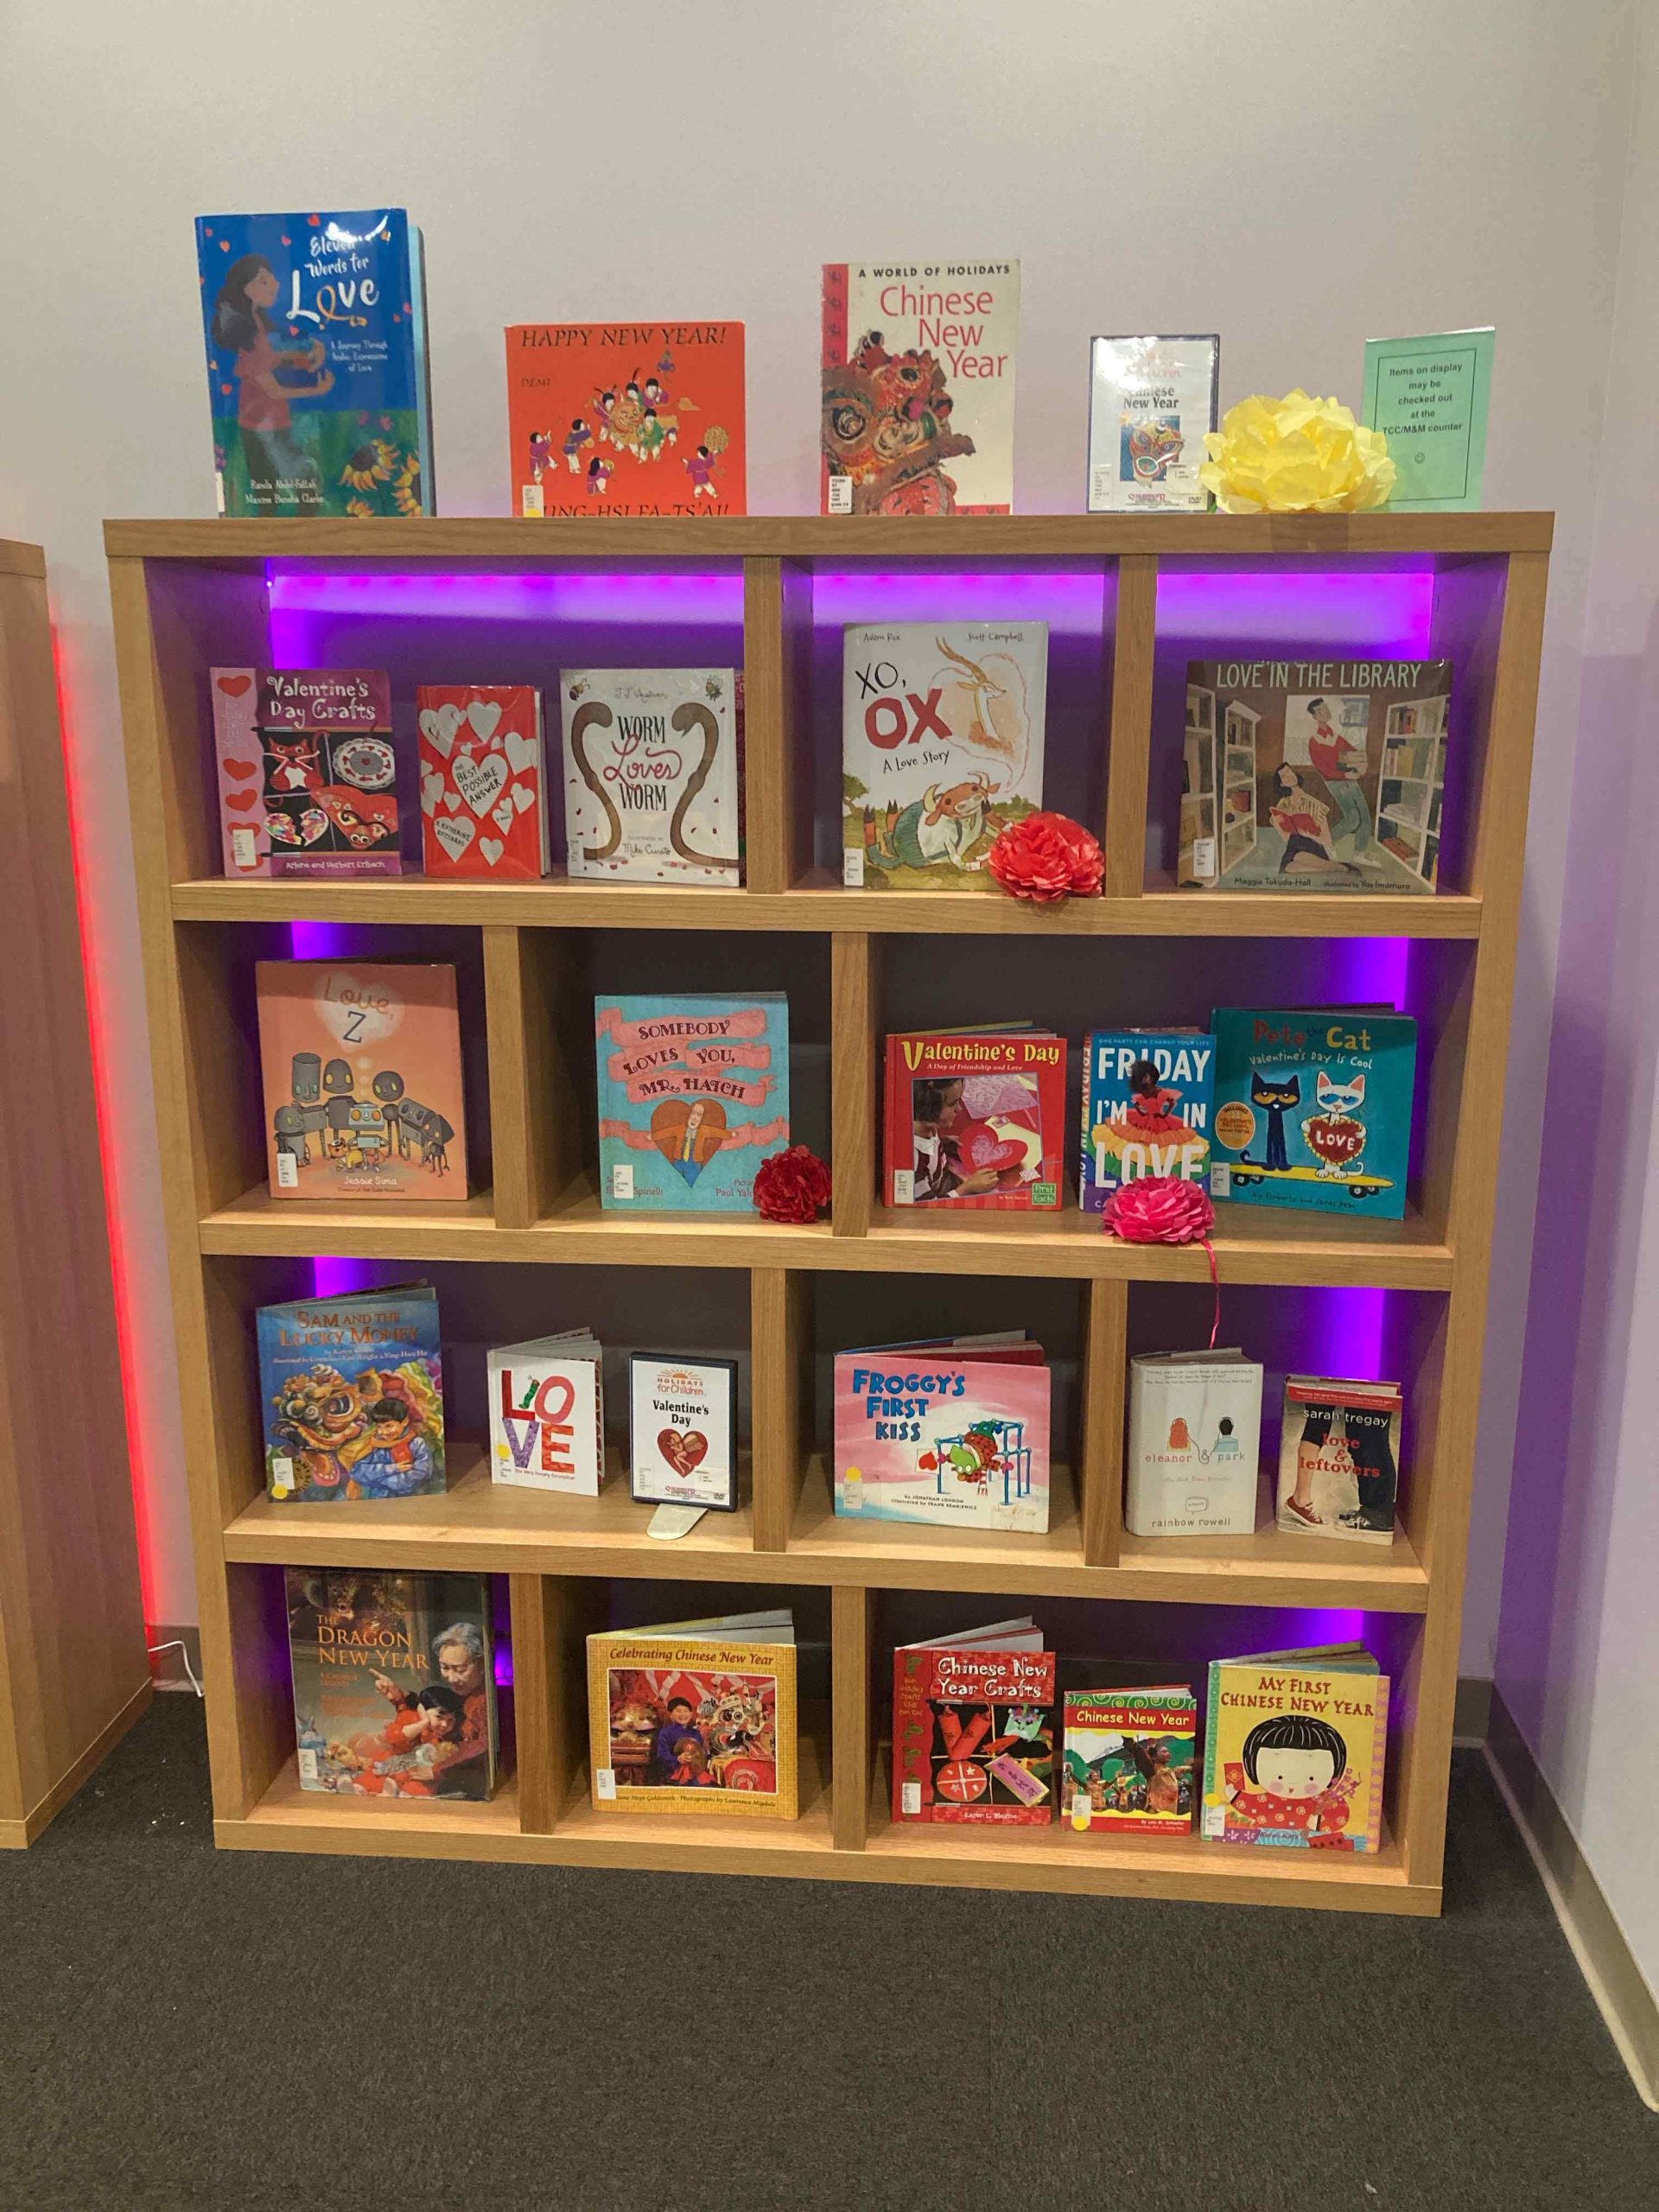 Photo of a book display shelf with several childrens' books about Chinese and Lunar New Year